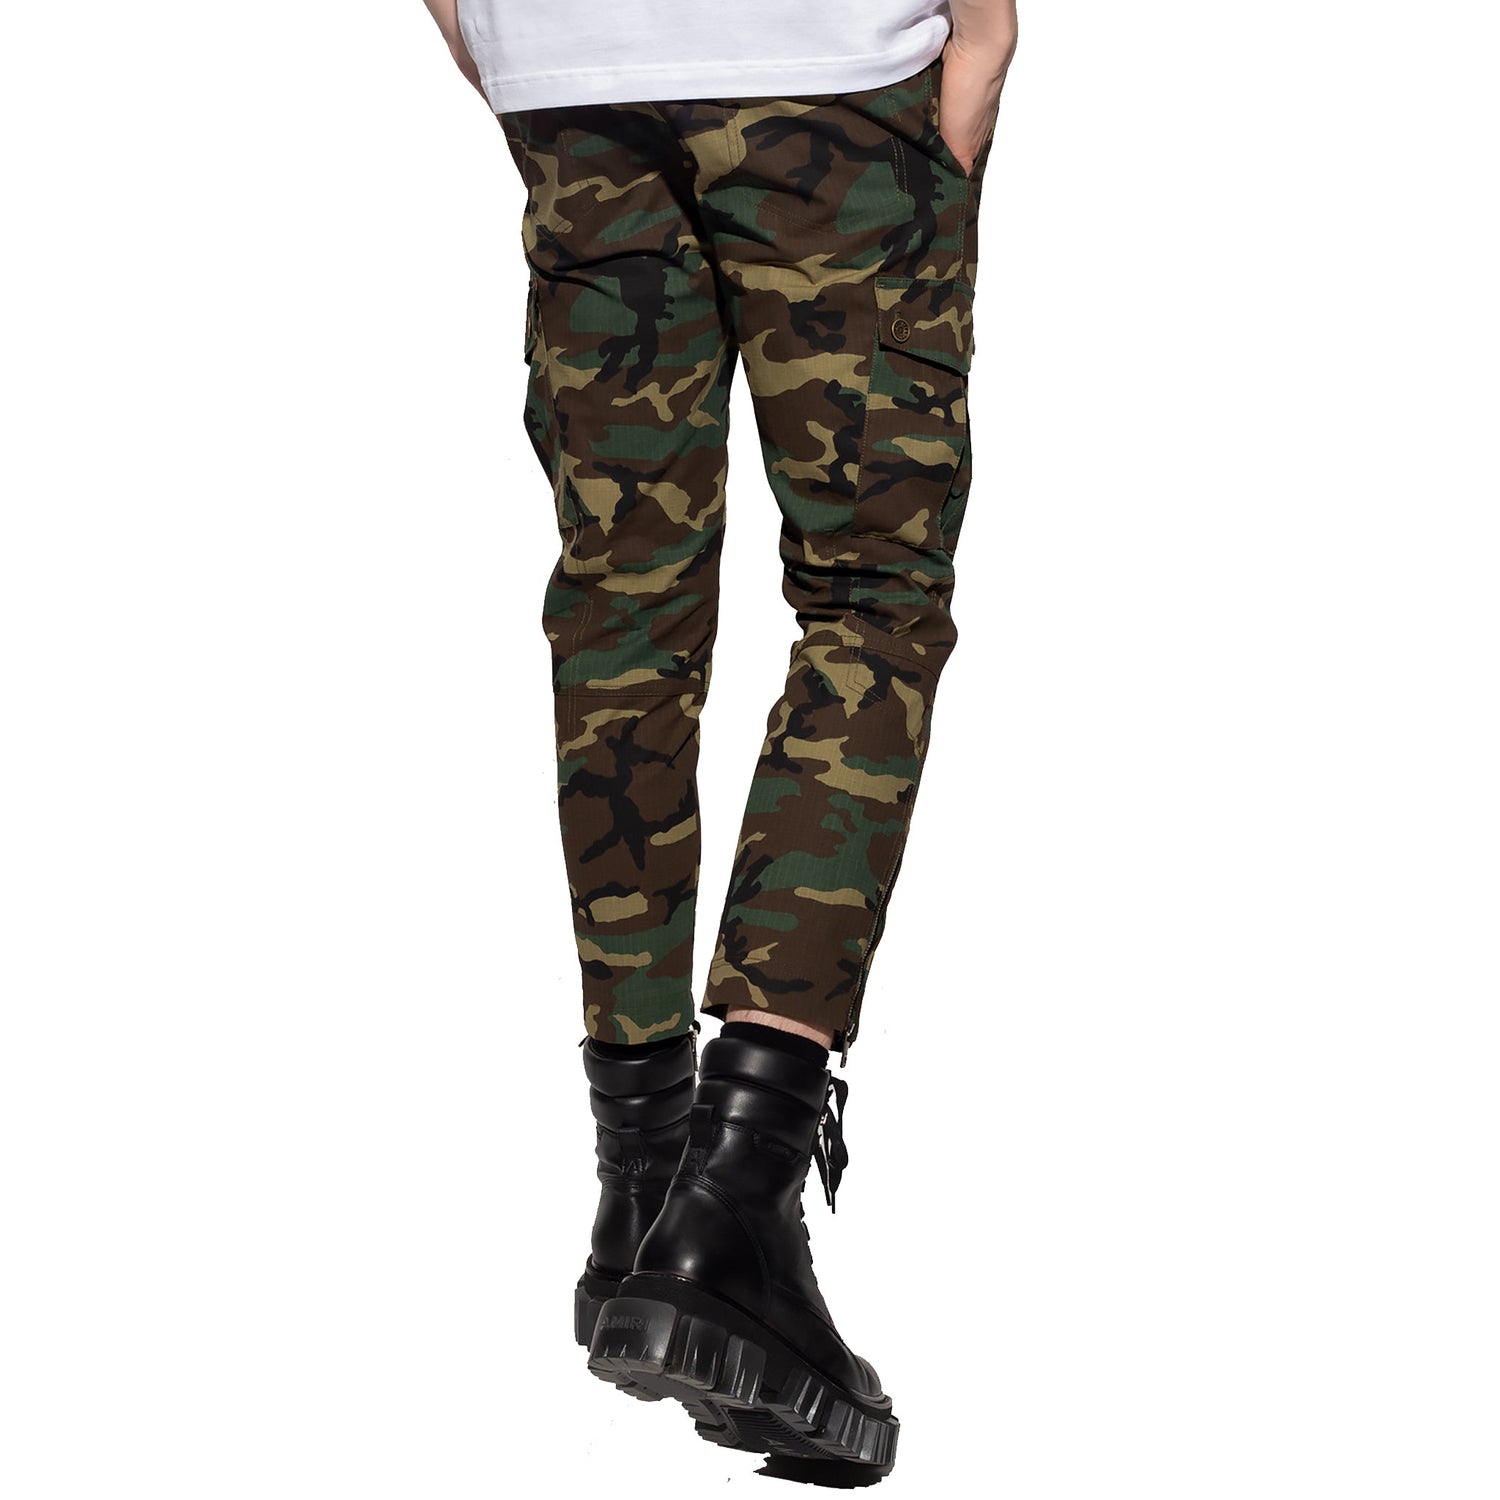 Dolce & Gabbana Men's Camouflage-Print Cargo Trousers